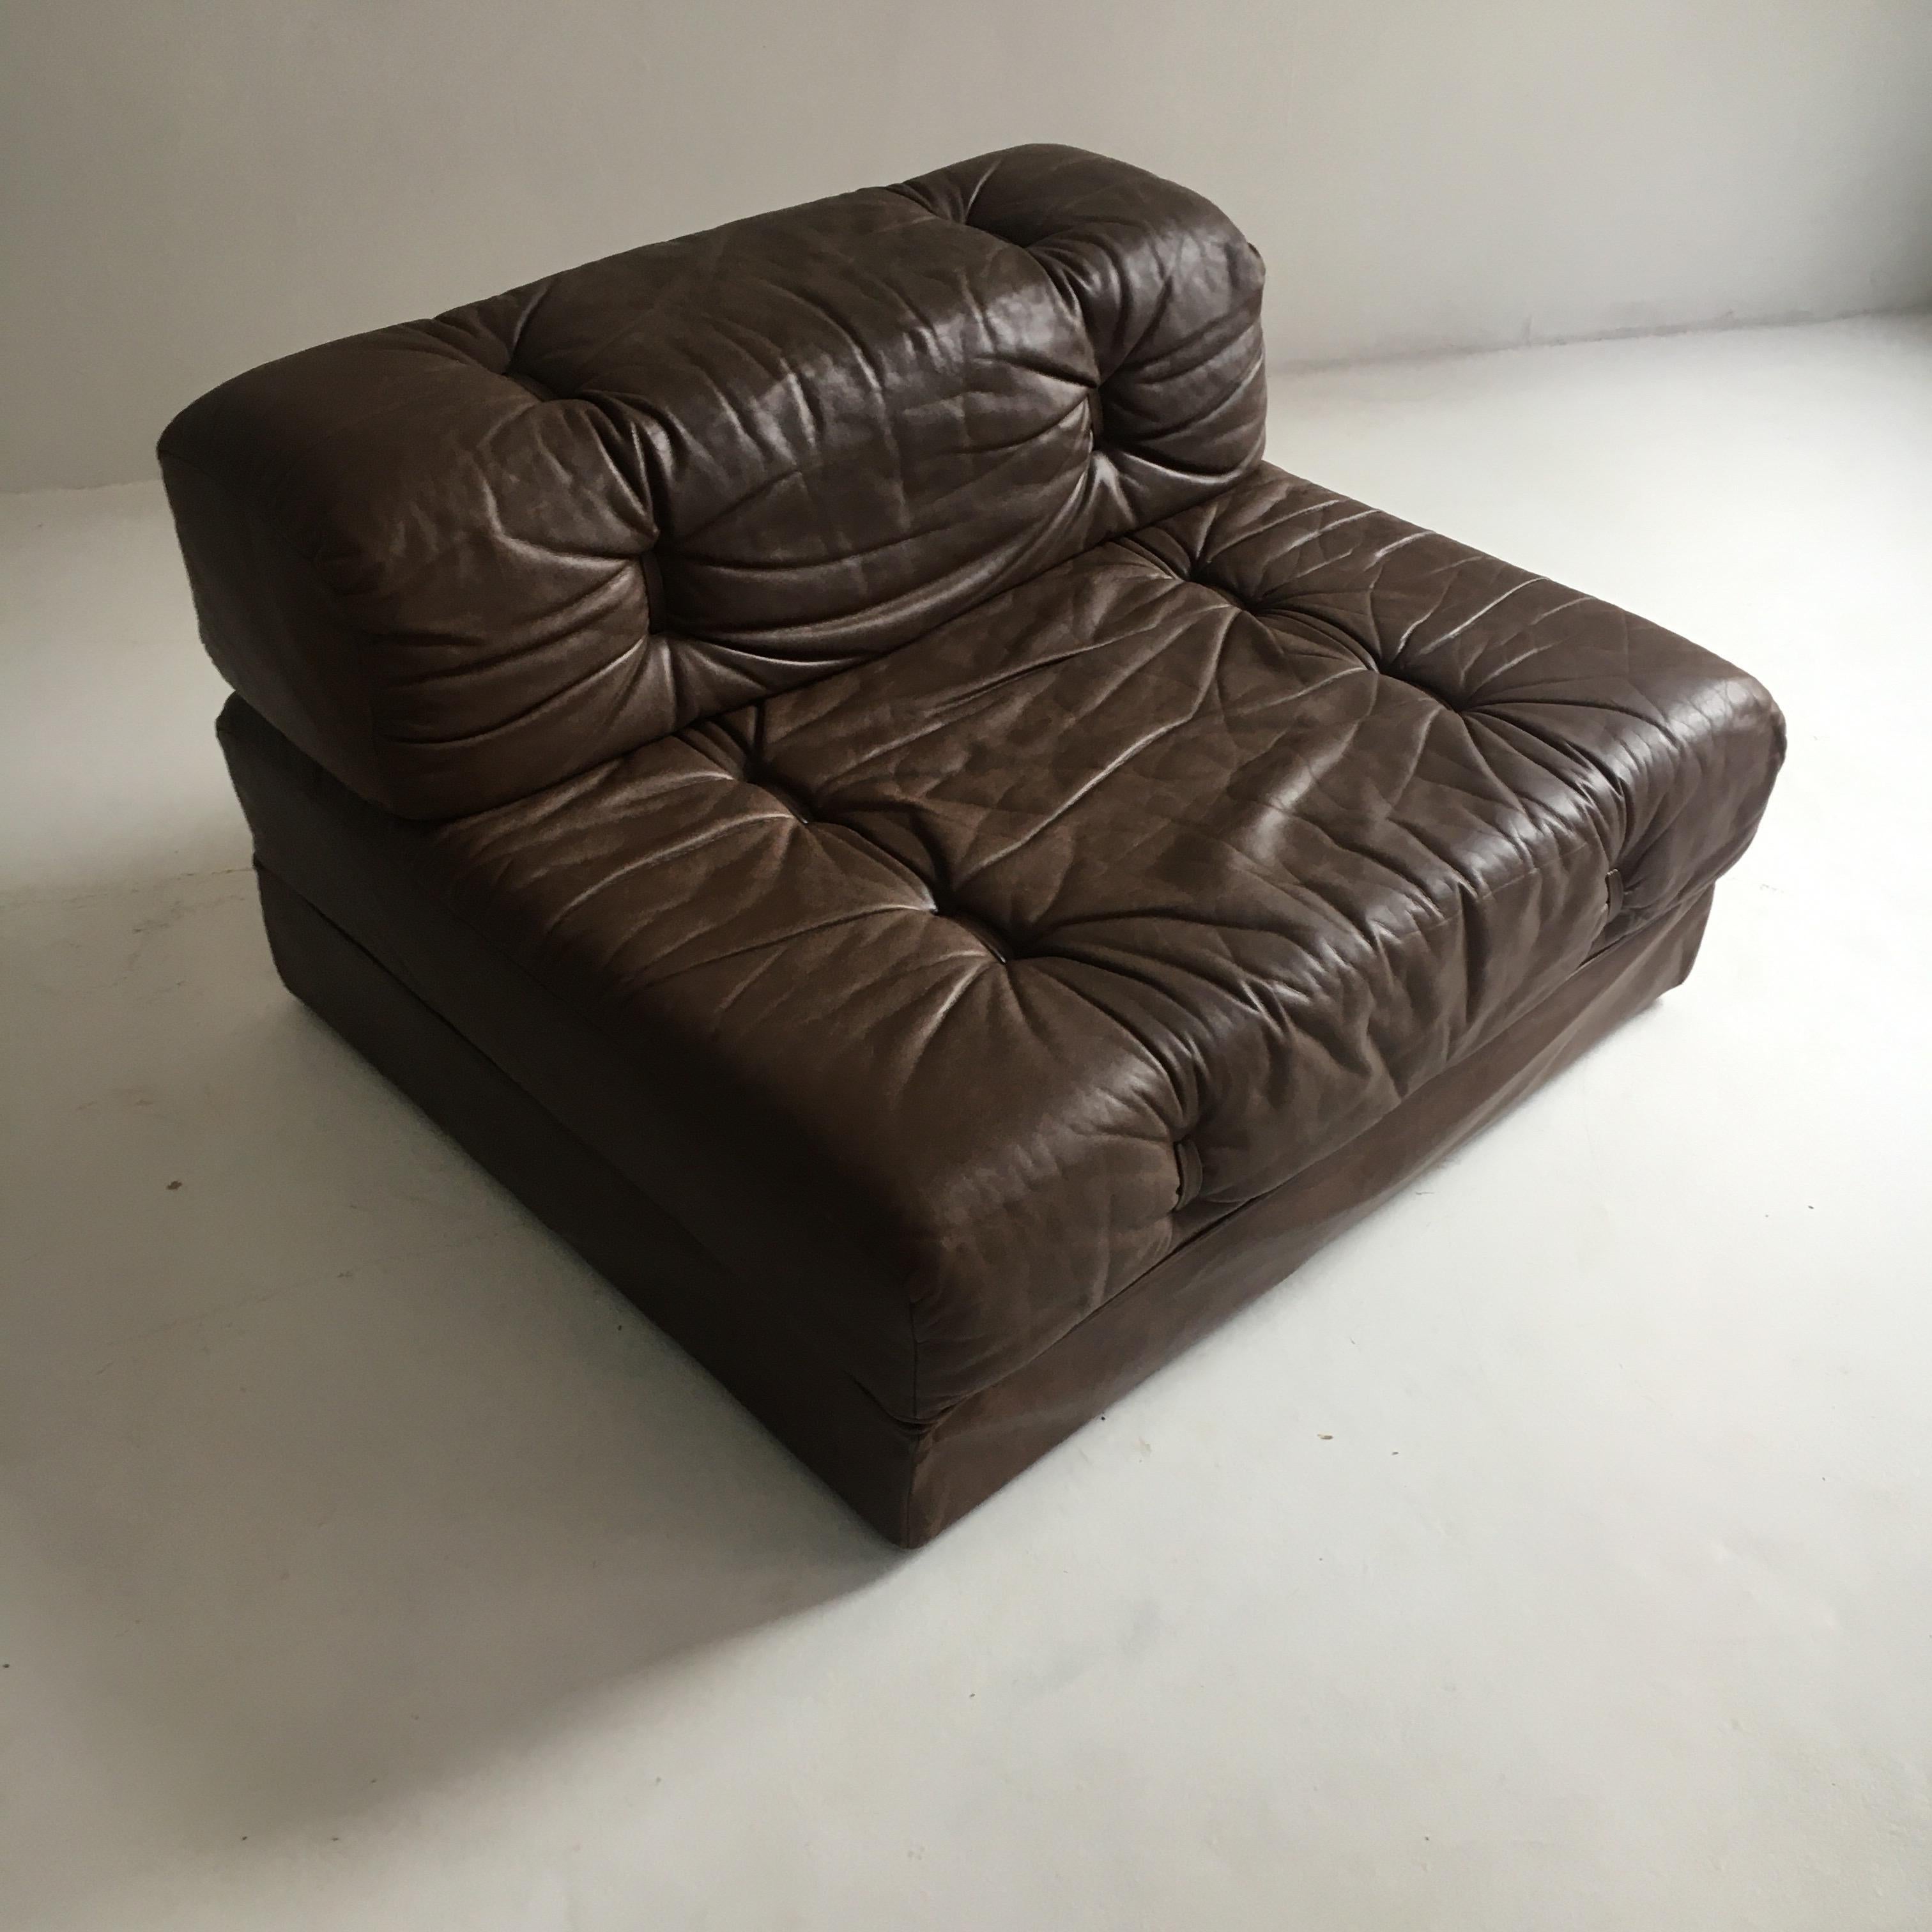 Wittmann Atrium Lounge Chair Convertible Daybed, Austria, 1970 For Sale 3